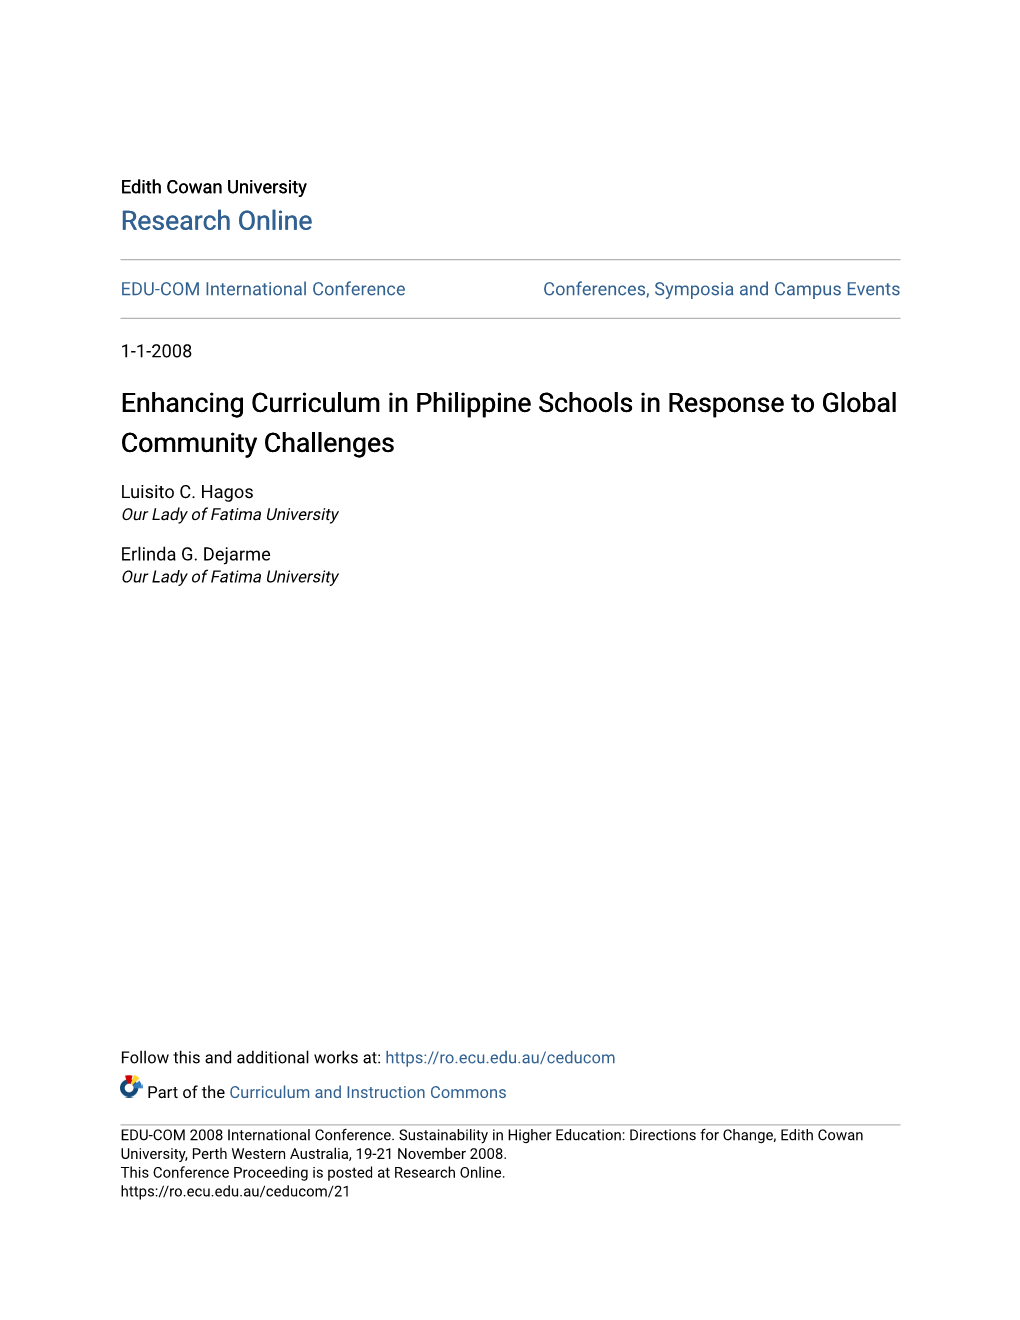 Enhancing Curriculum in Philippine Schools in Response to Global Community Challenges